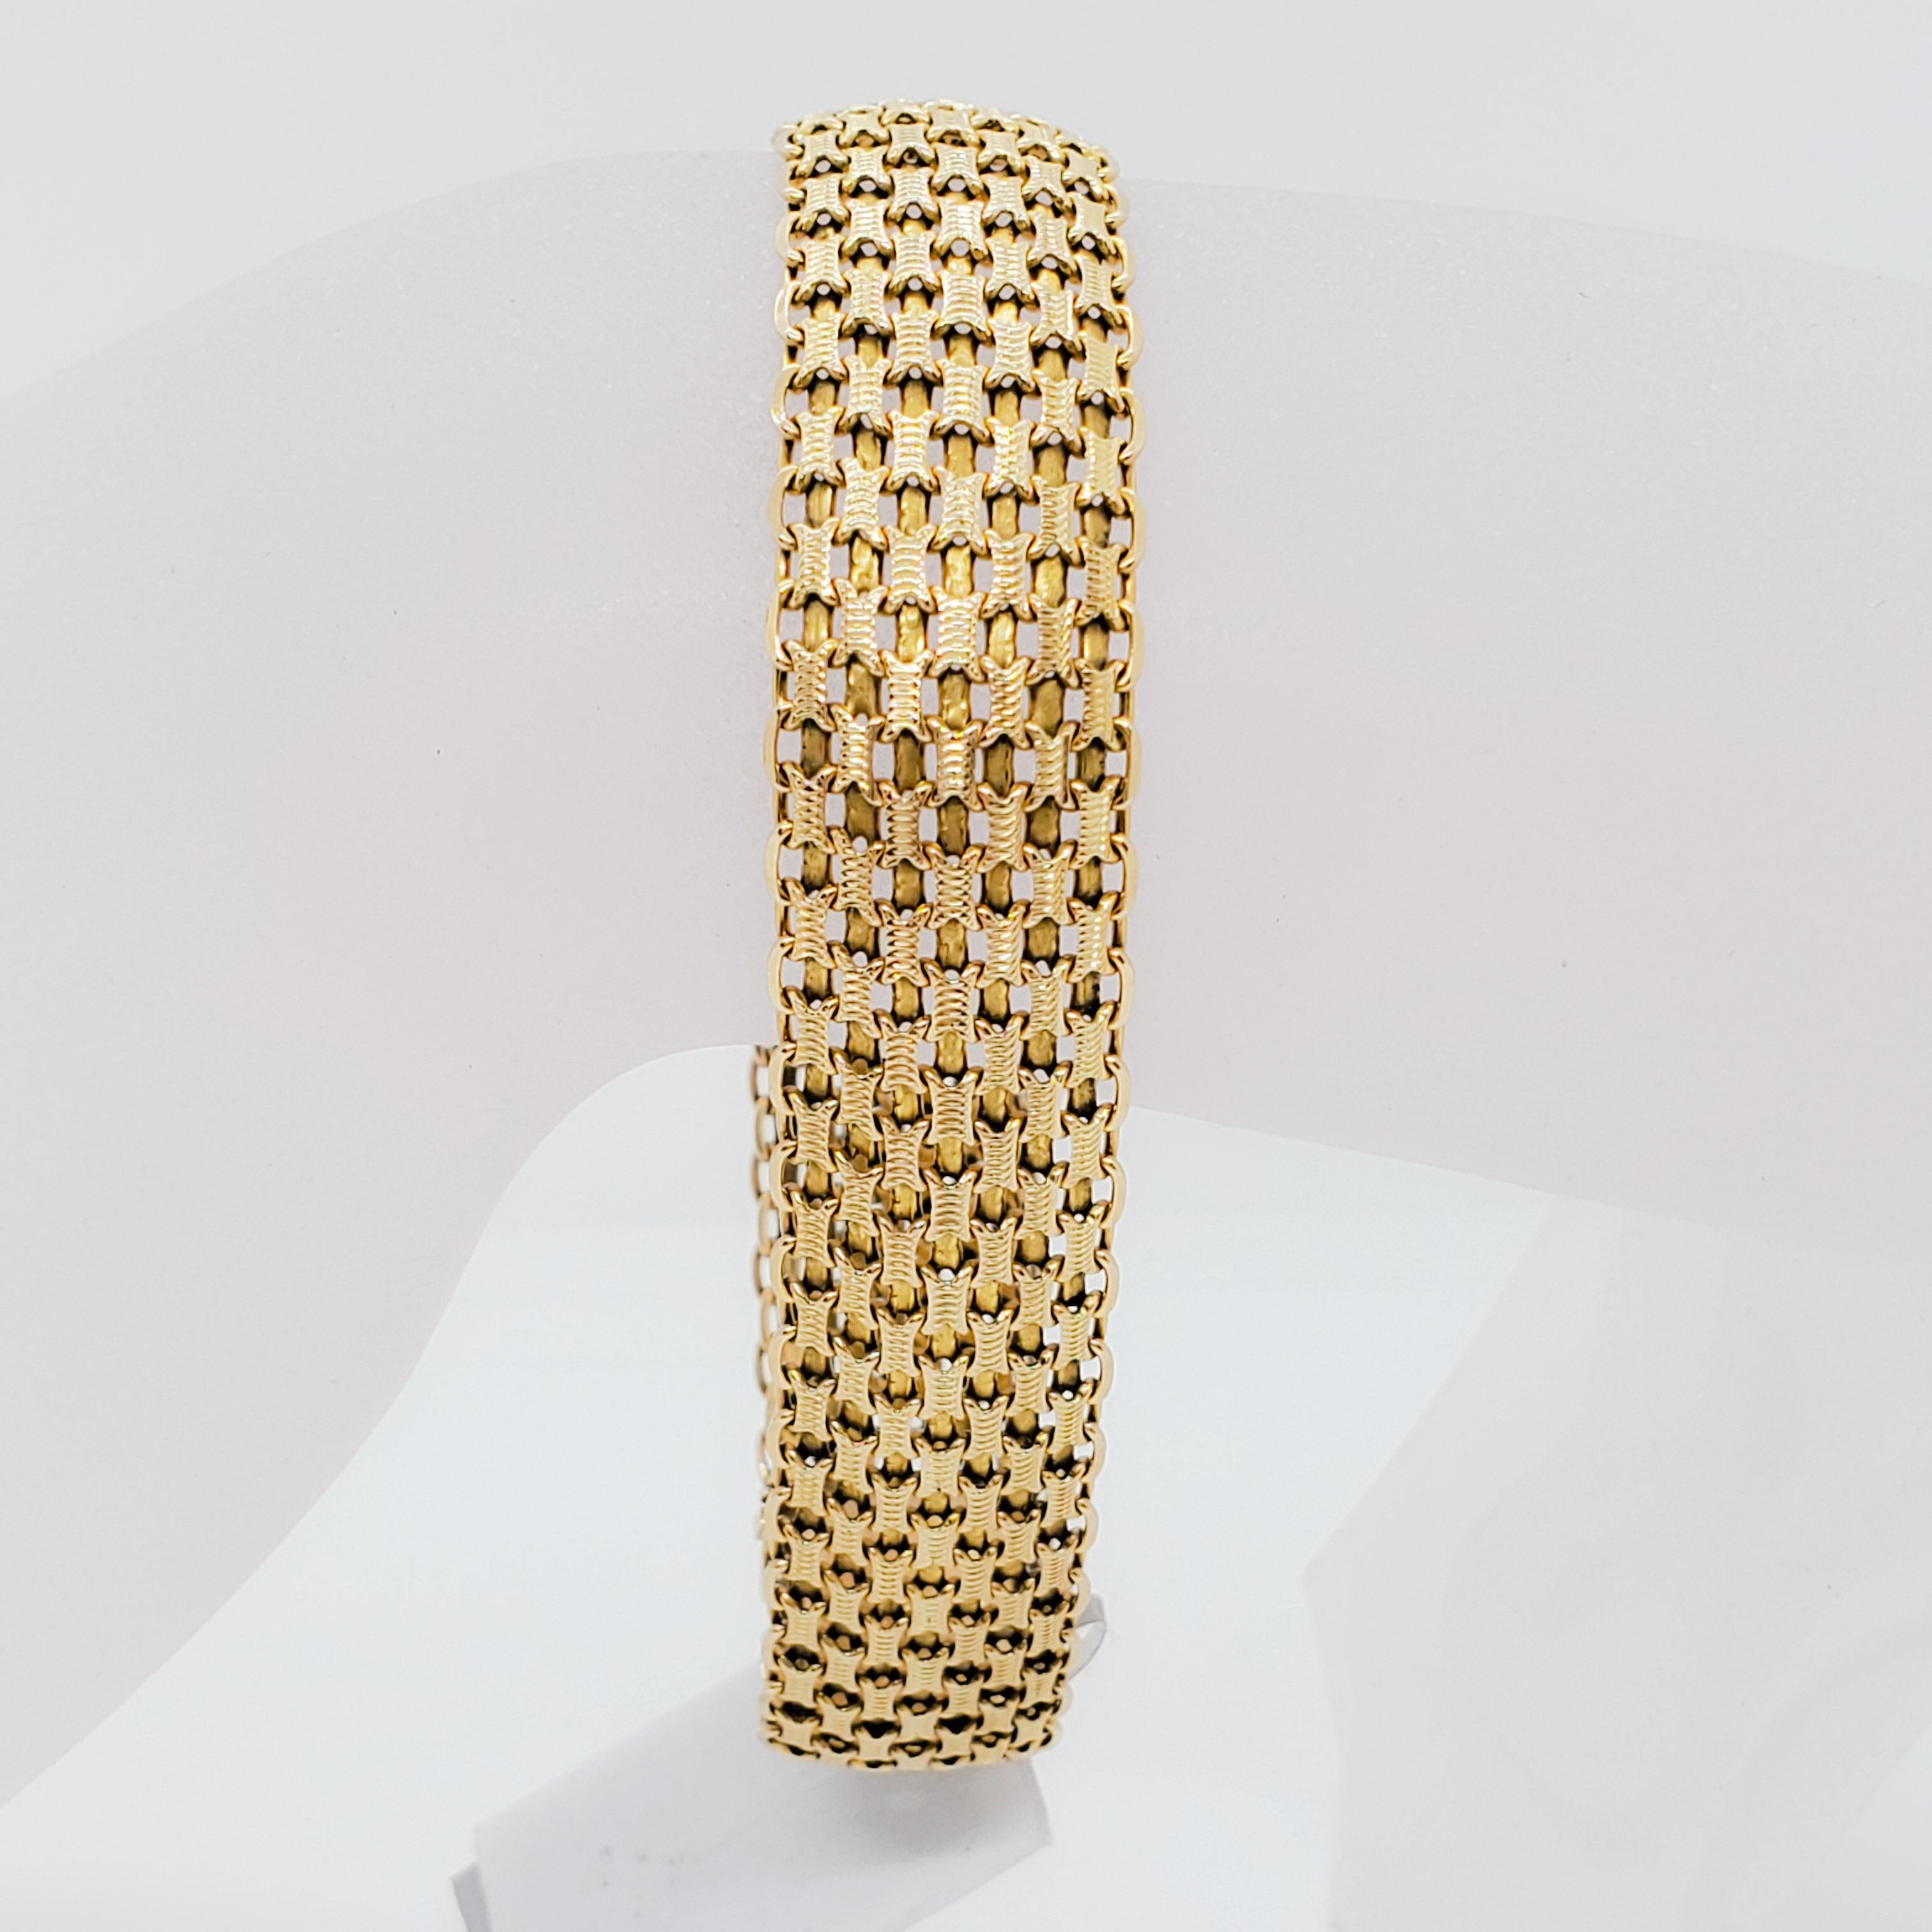 Beautiful estate yellow gold bracelet in 14k.  The design is so pretty and handmade.  Perfect for stacking or wearing on it's own.  Mint condition.  Length is 8.25